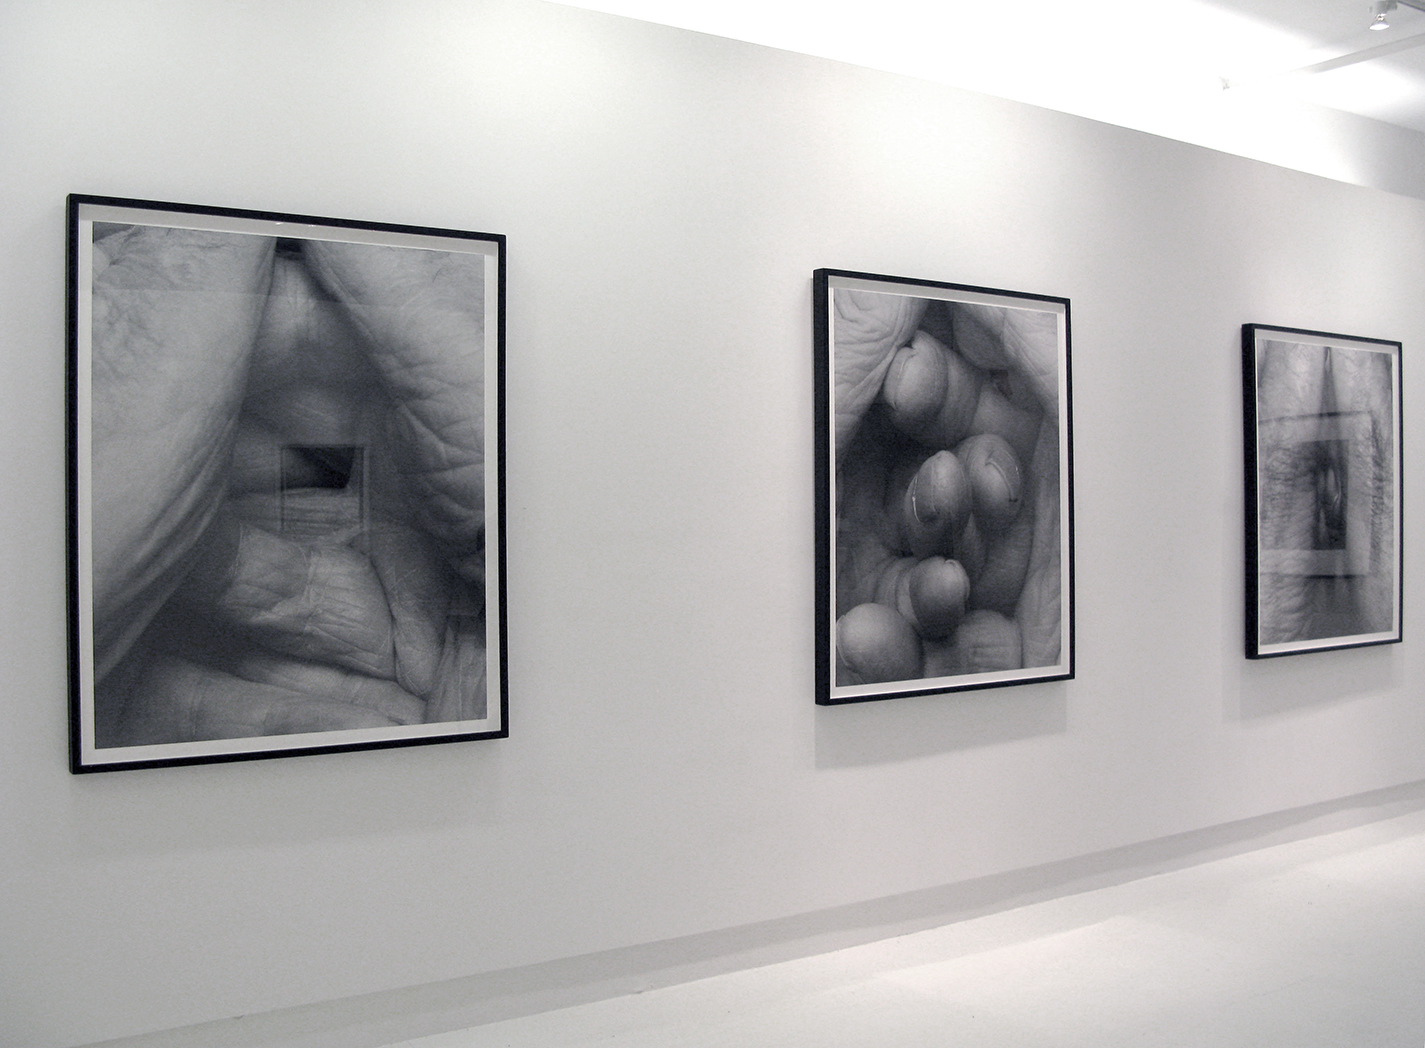 Installation view, from left: "Interlocking Fingers, No. 23, 2000," 47 x 38 in.; "Interlocking Fingers, No. 17, 2000," 47 x 38 in.; "Interlocking Fingers, No. 22, 2000," 47 x 38 in.